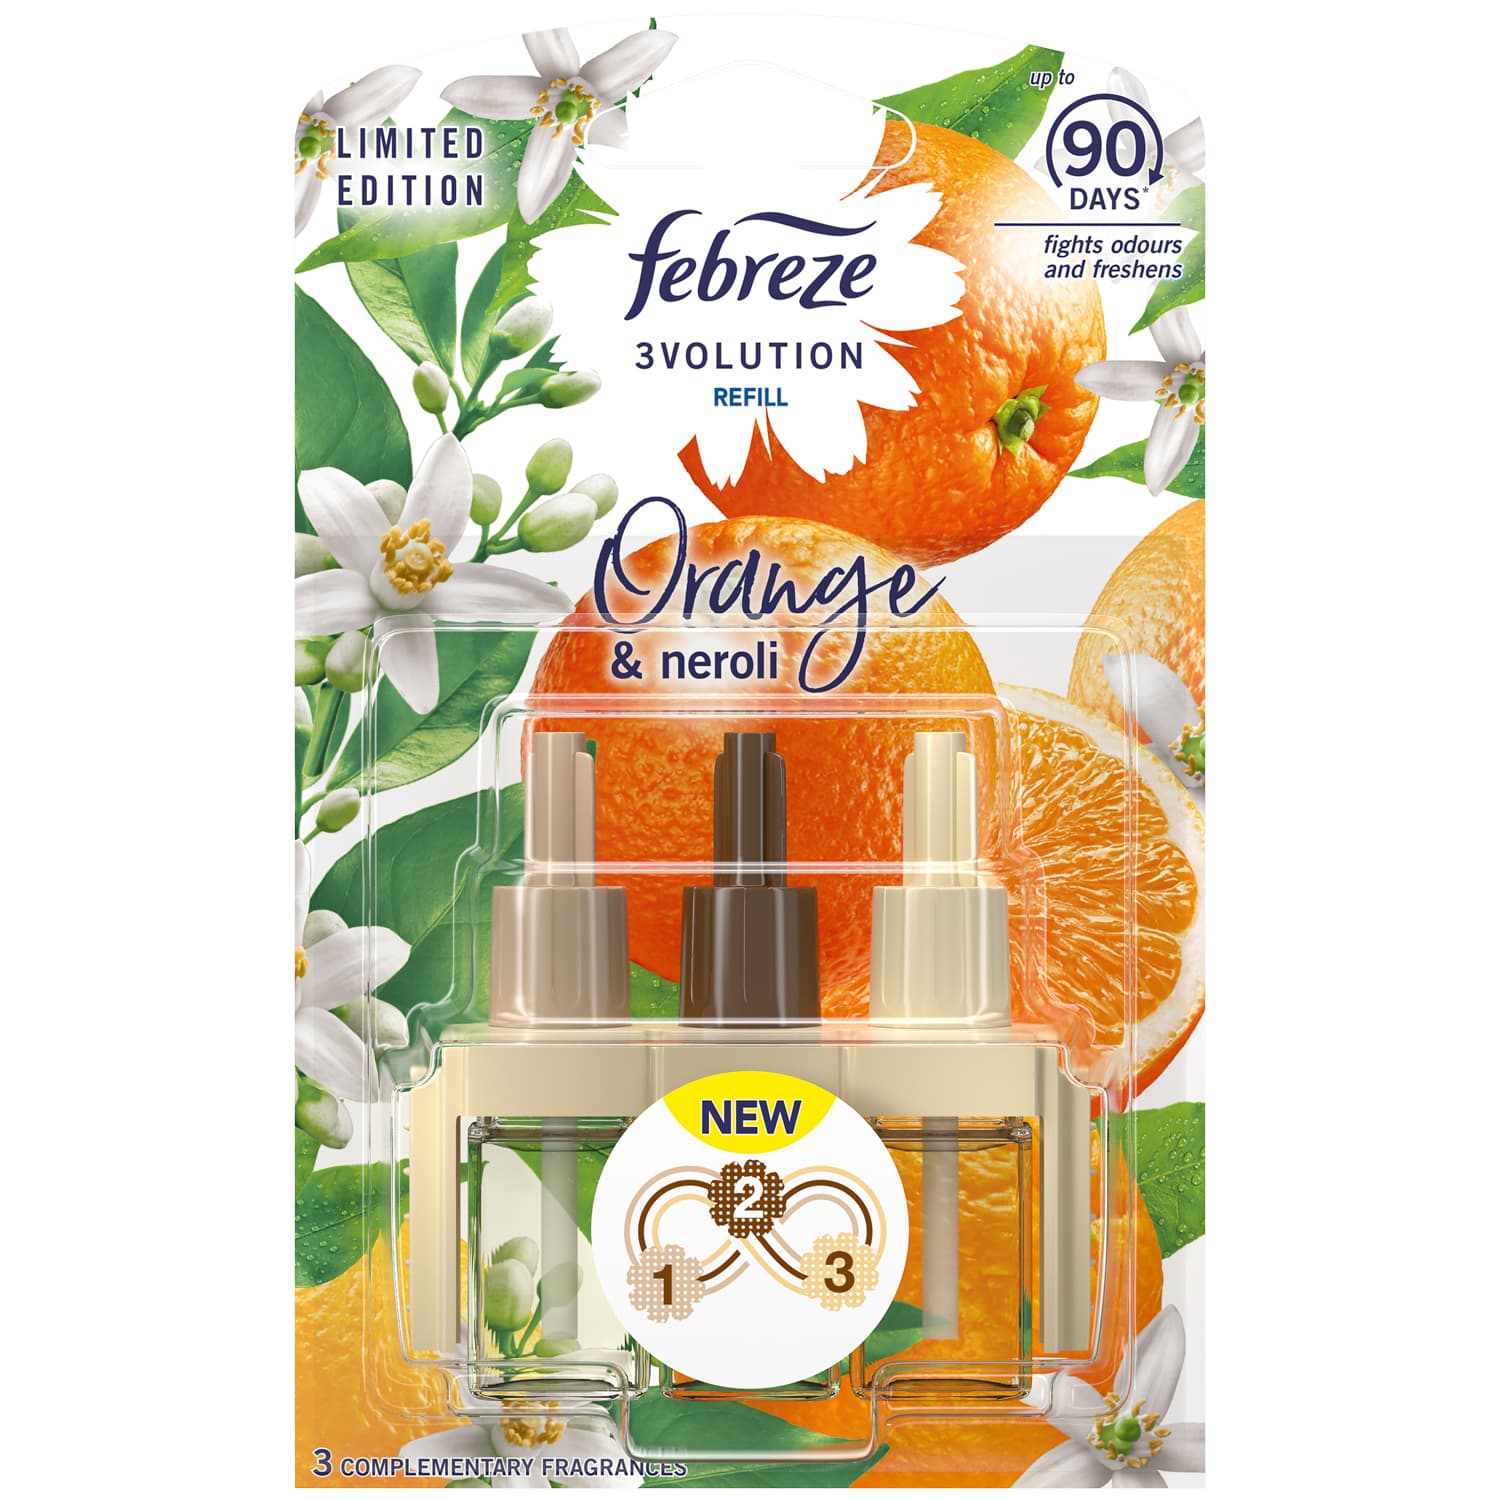 https://www.bmstores.co.uk/images/hpcProductImage/imgSource/398731-febreze-3-volution-plug-in-refill-orange-and-neroli.jpg